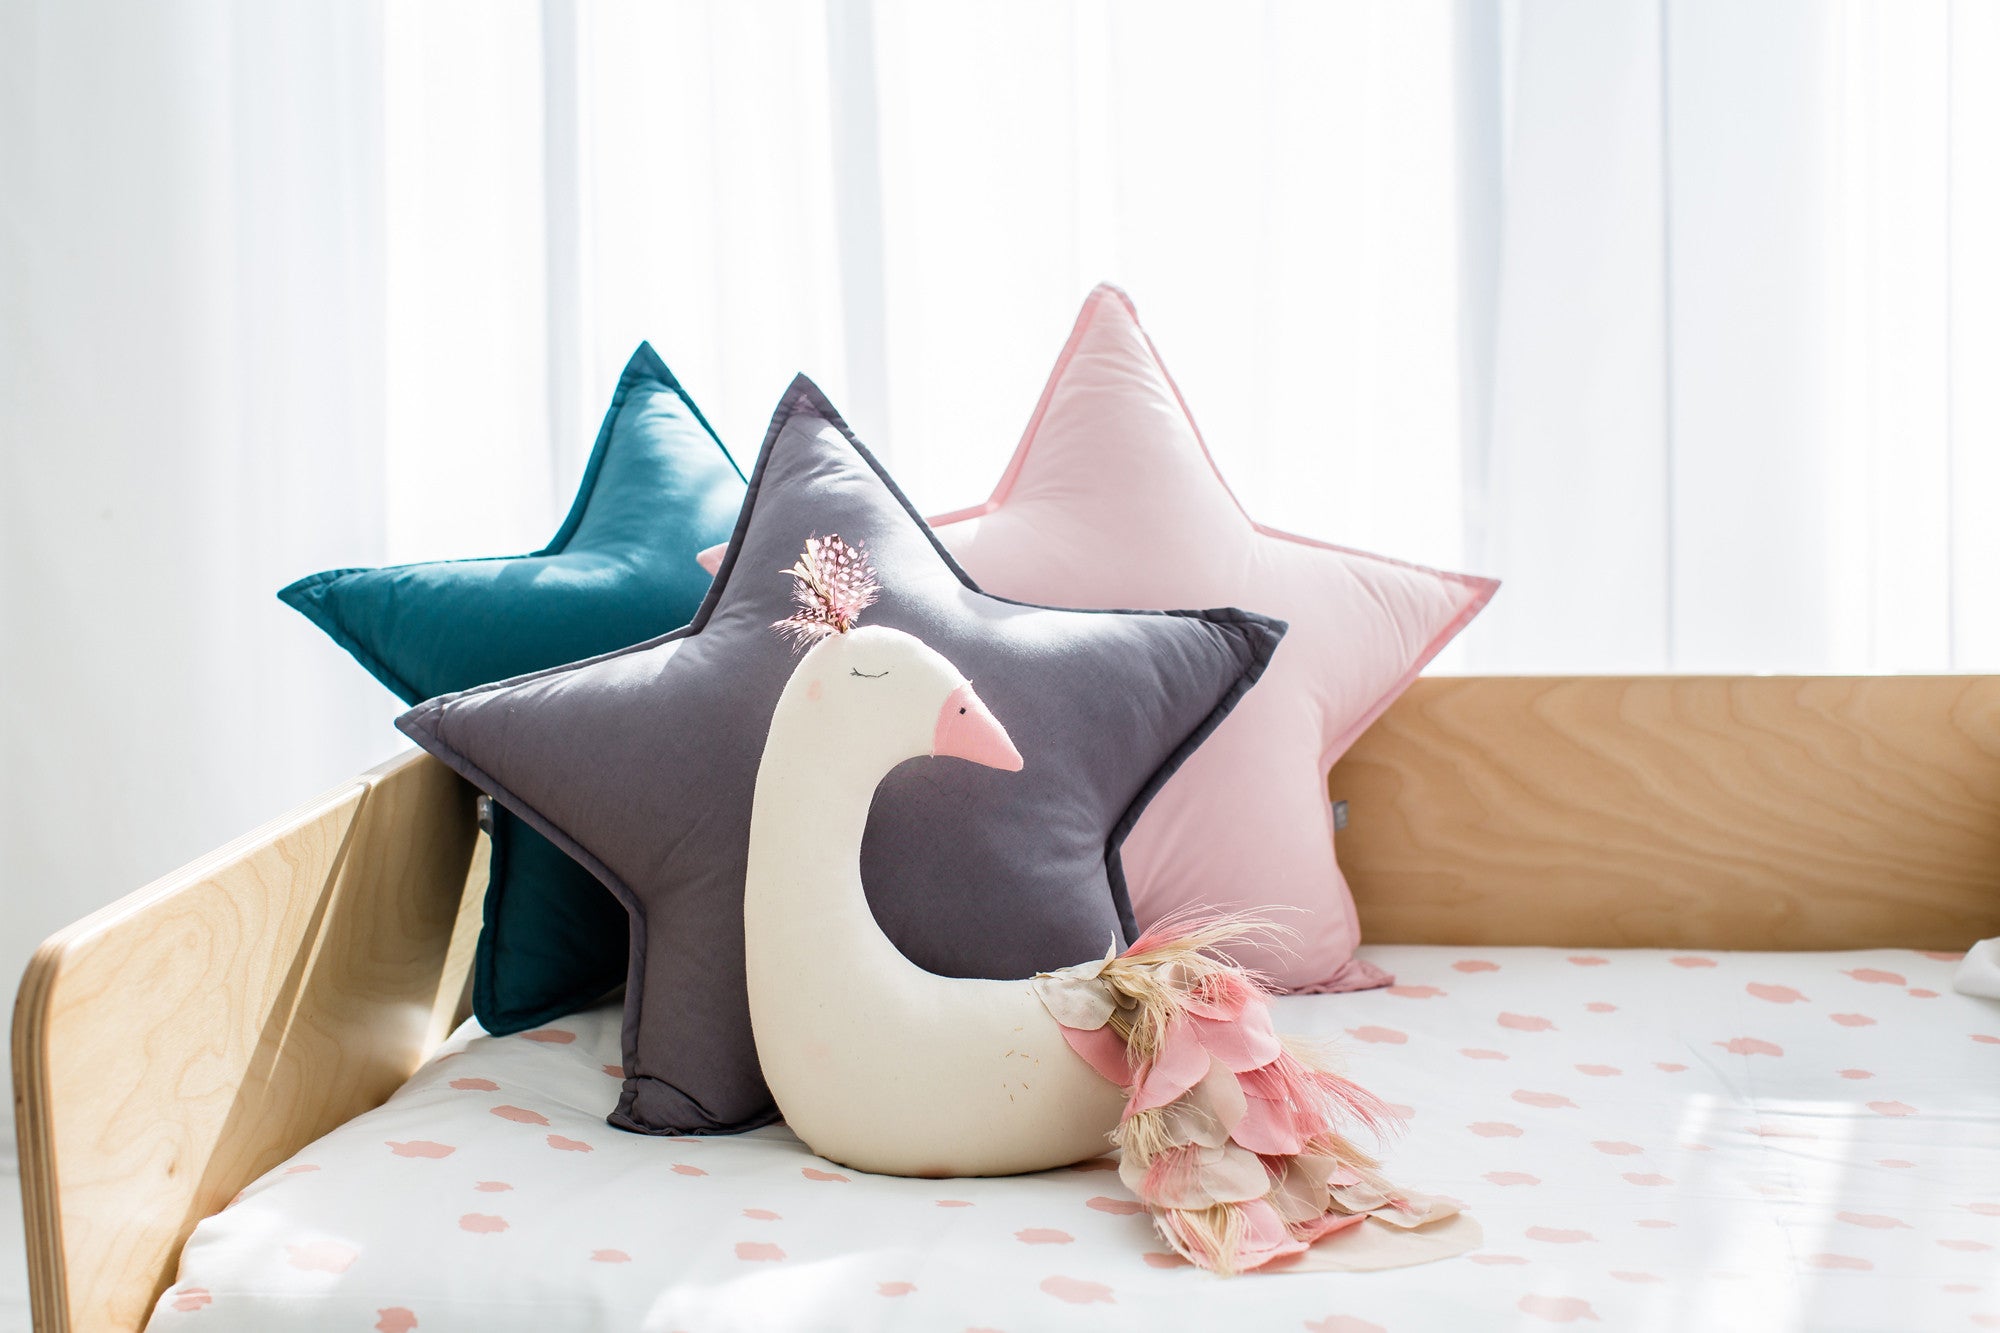 Star cushions and peacock decoration, available at Bobby Rabbit.